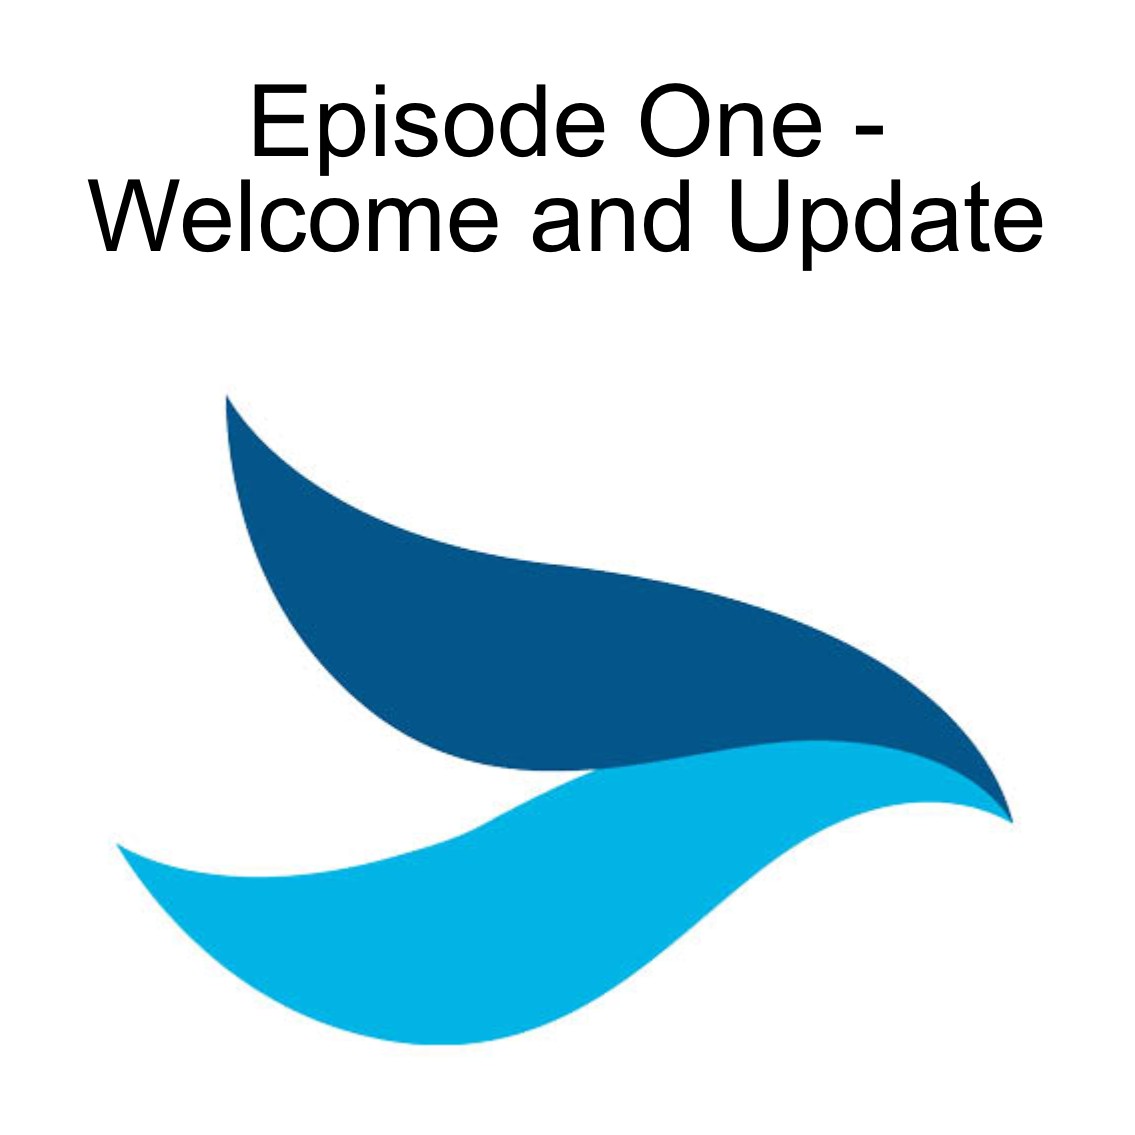 Episode 1 - Welcome and Update